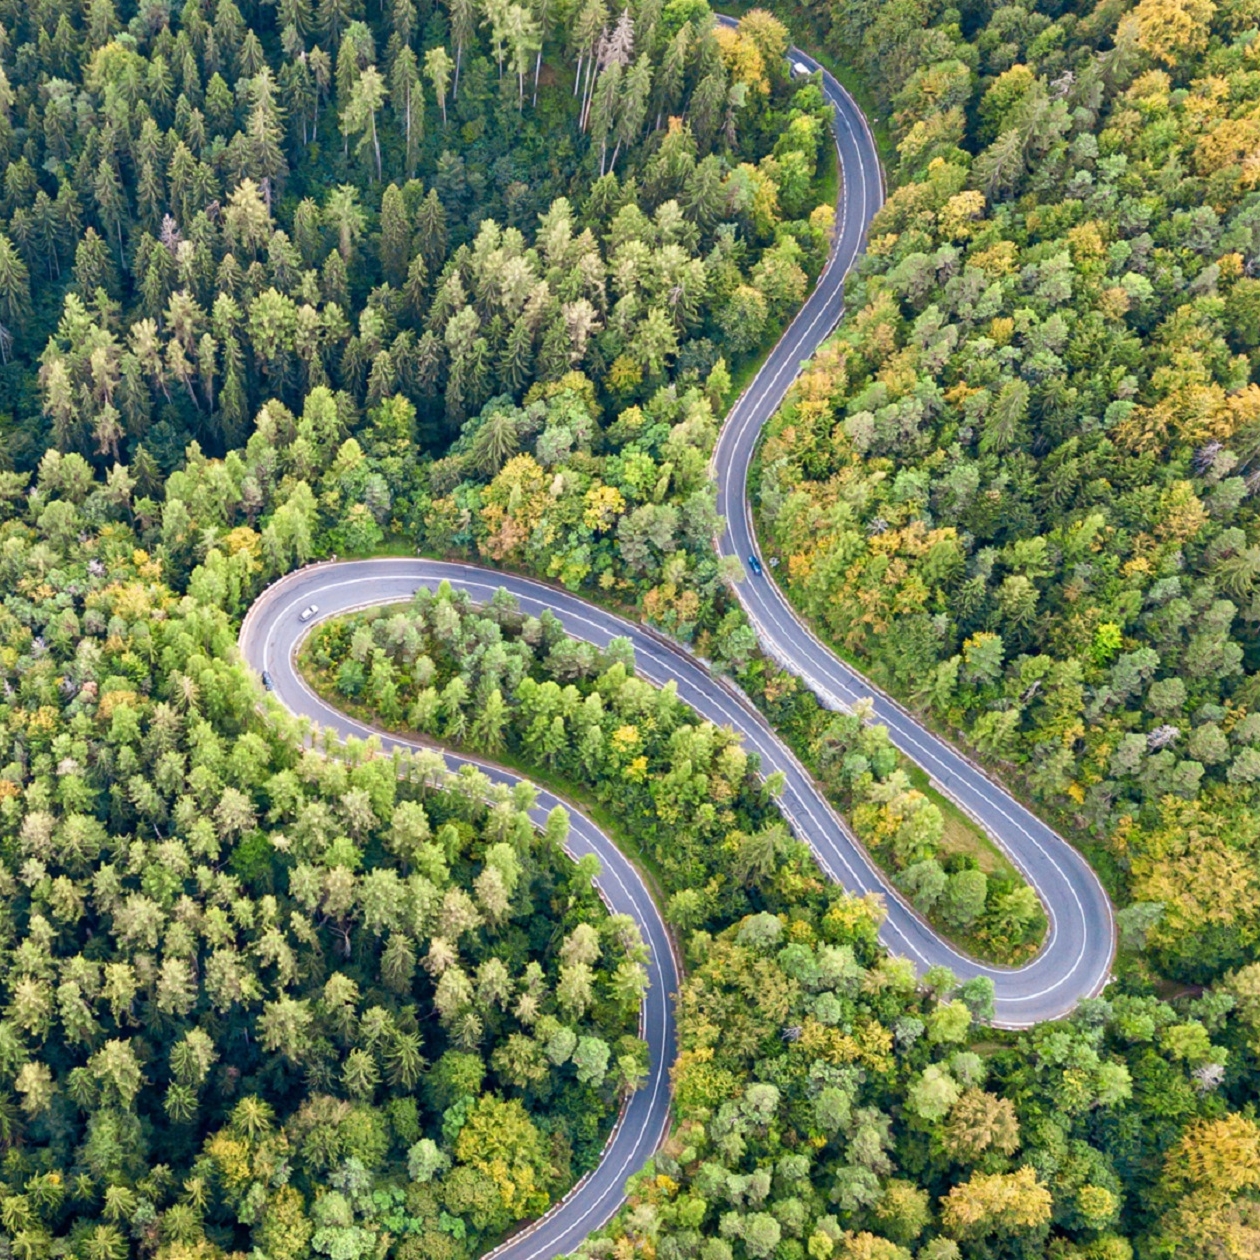 Winding road through a forest